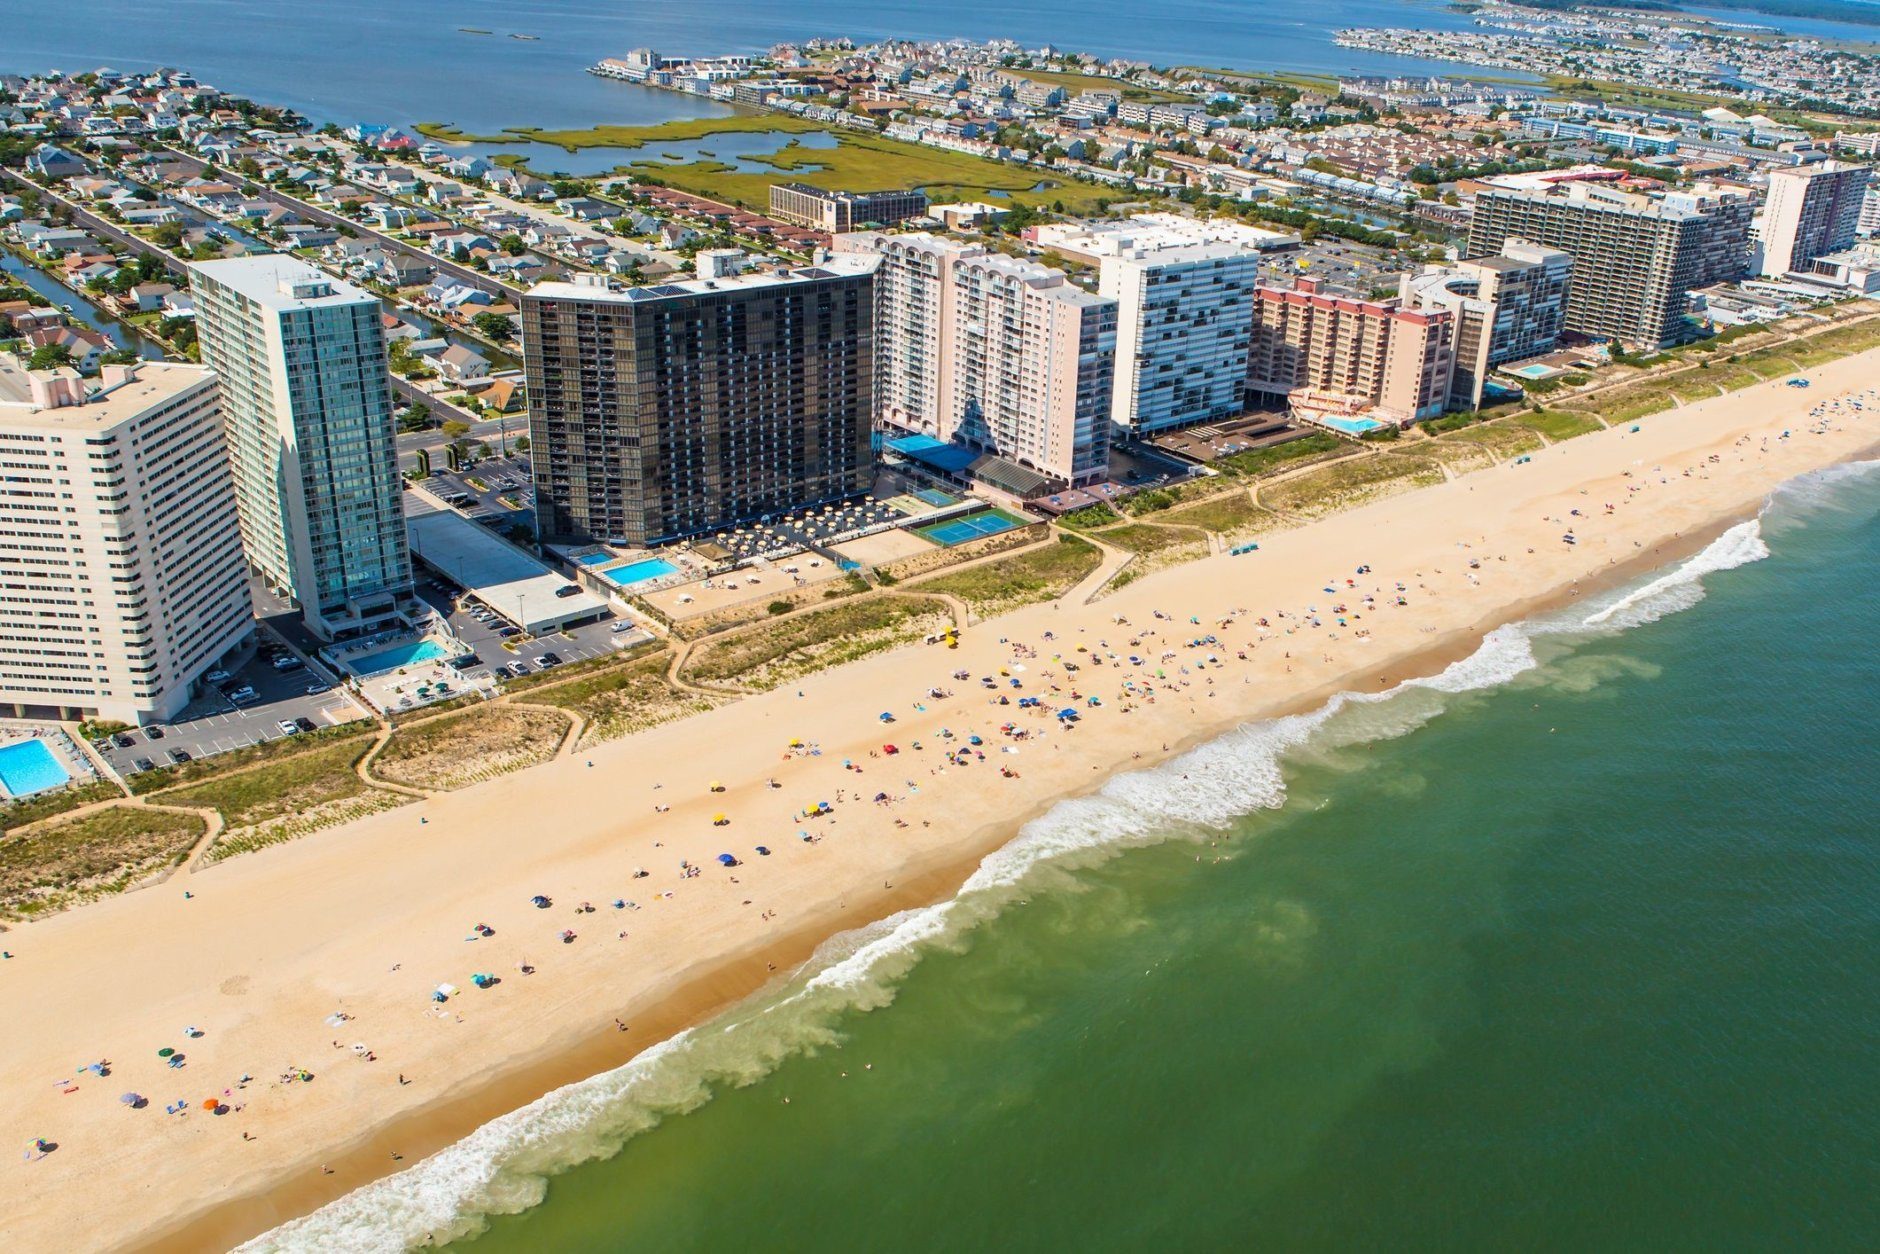 Ocean City, Maryland, is one of the most popular beach resorts on the East Coast and is considered one of the cleanest in the country. (Getty Images/iStockphoto/rypson)